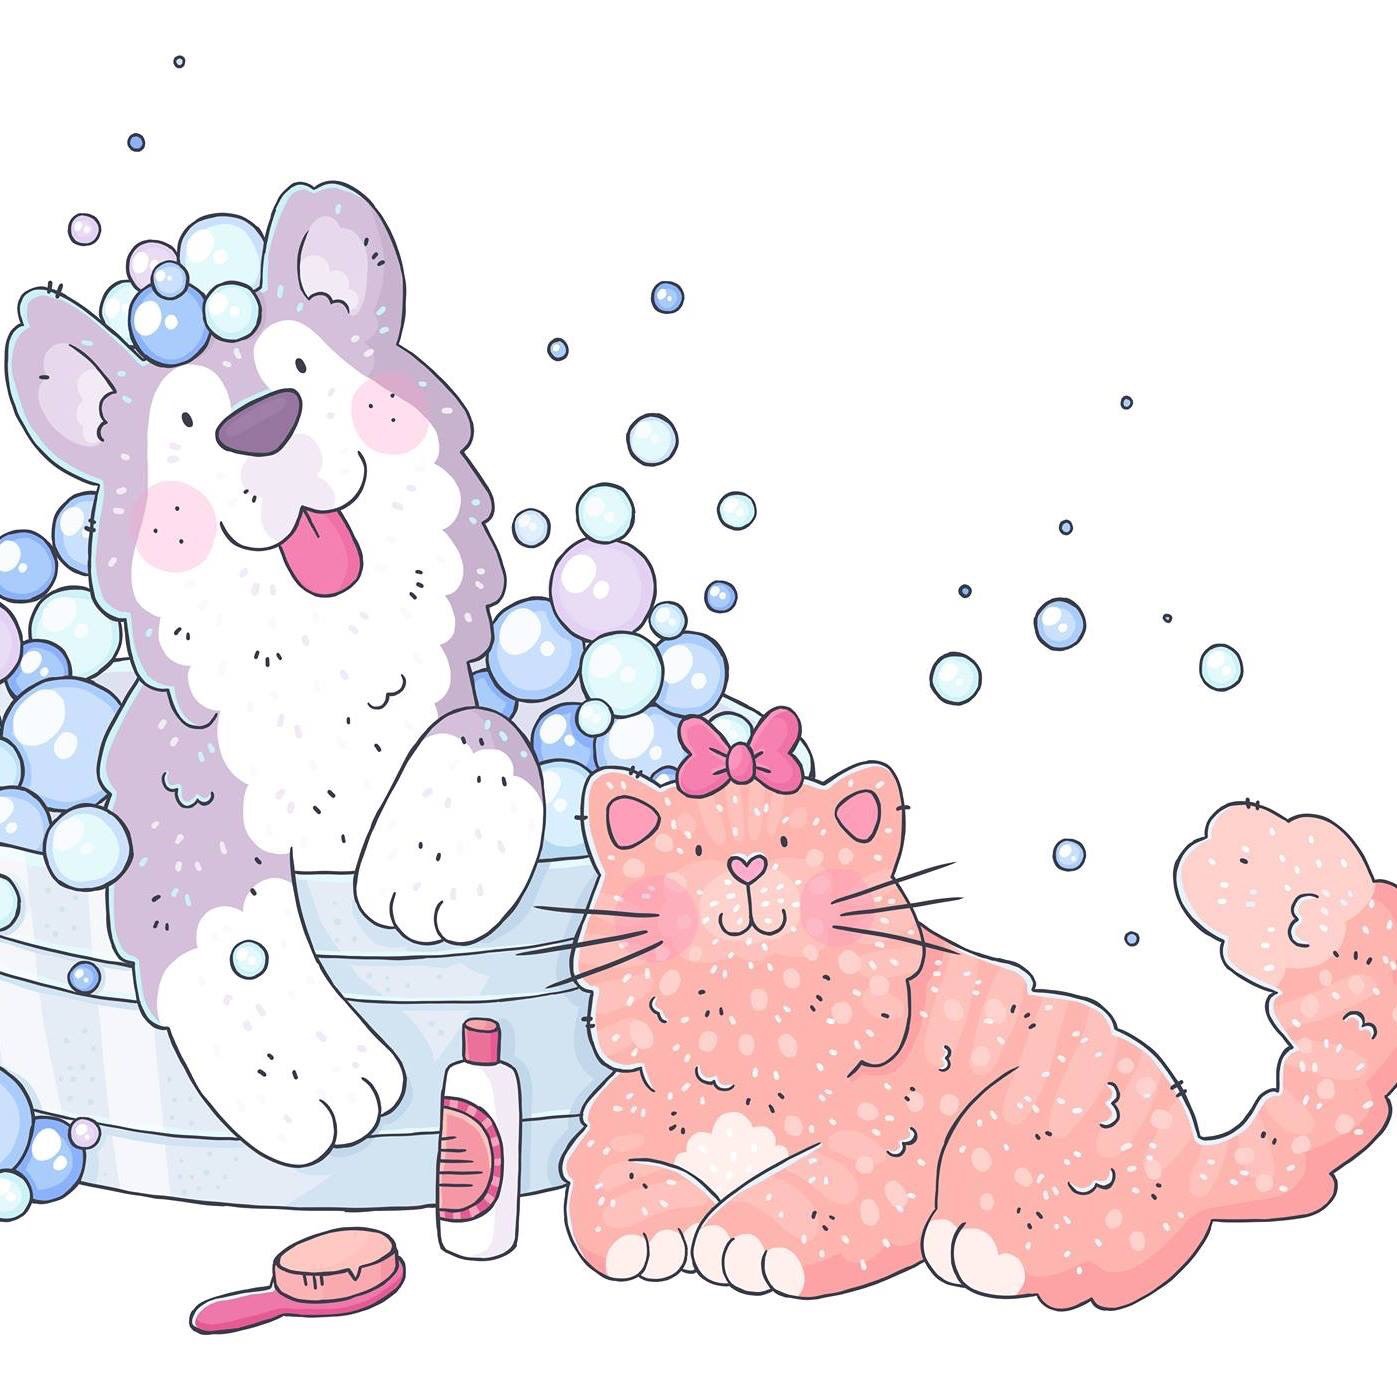 Bubbles and Bows